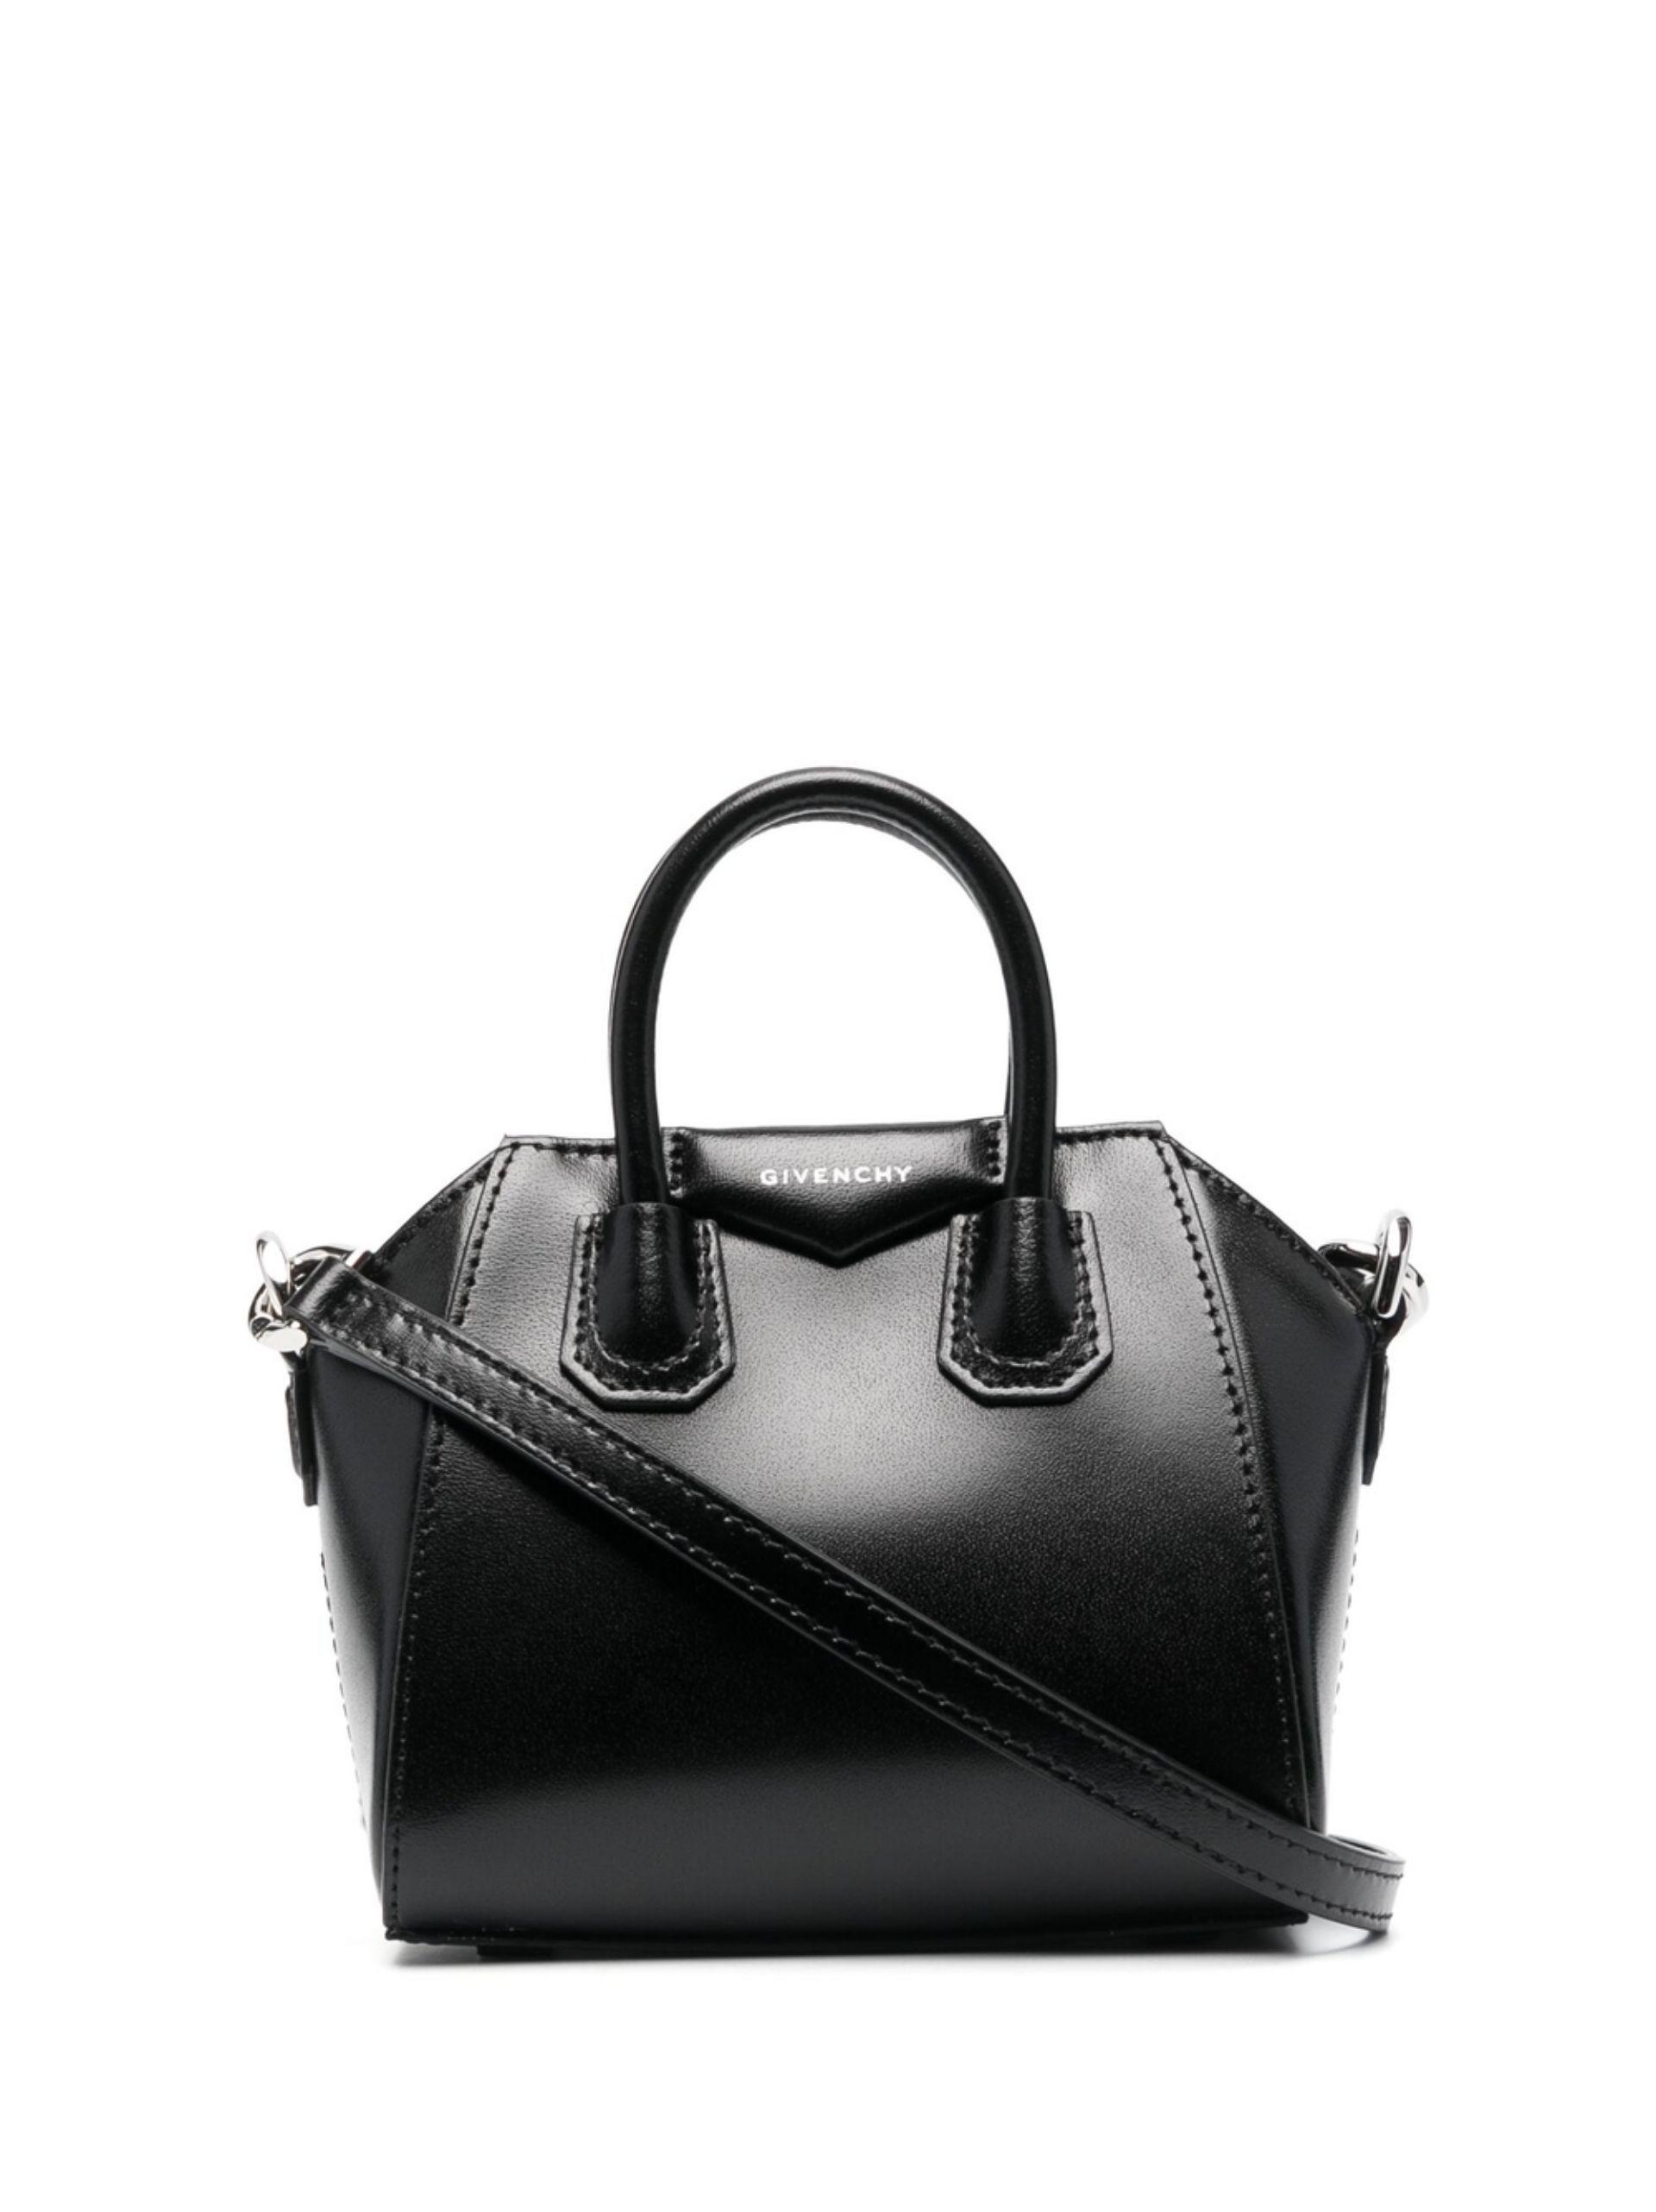 Givenchy Antigona Small Classic Smooth Black Calf Leather Tote Bag, new  with tag